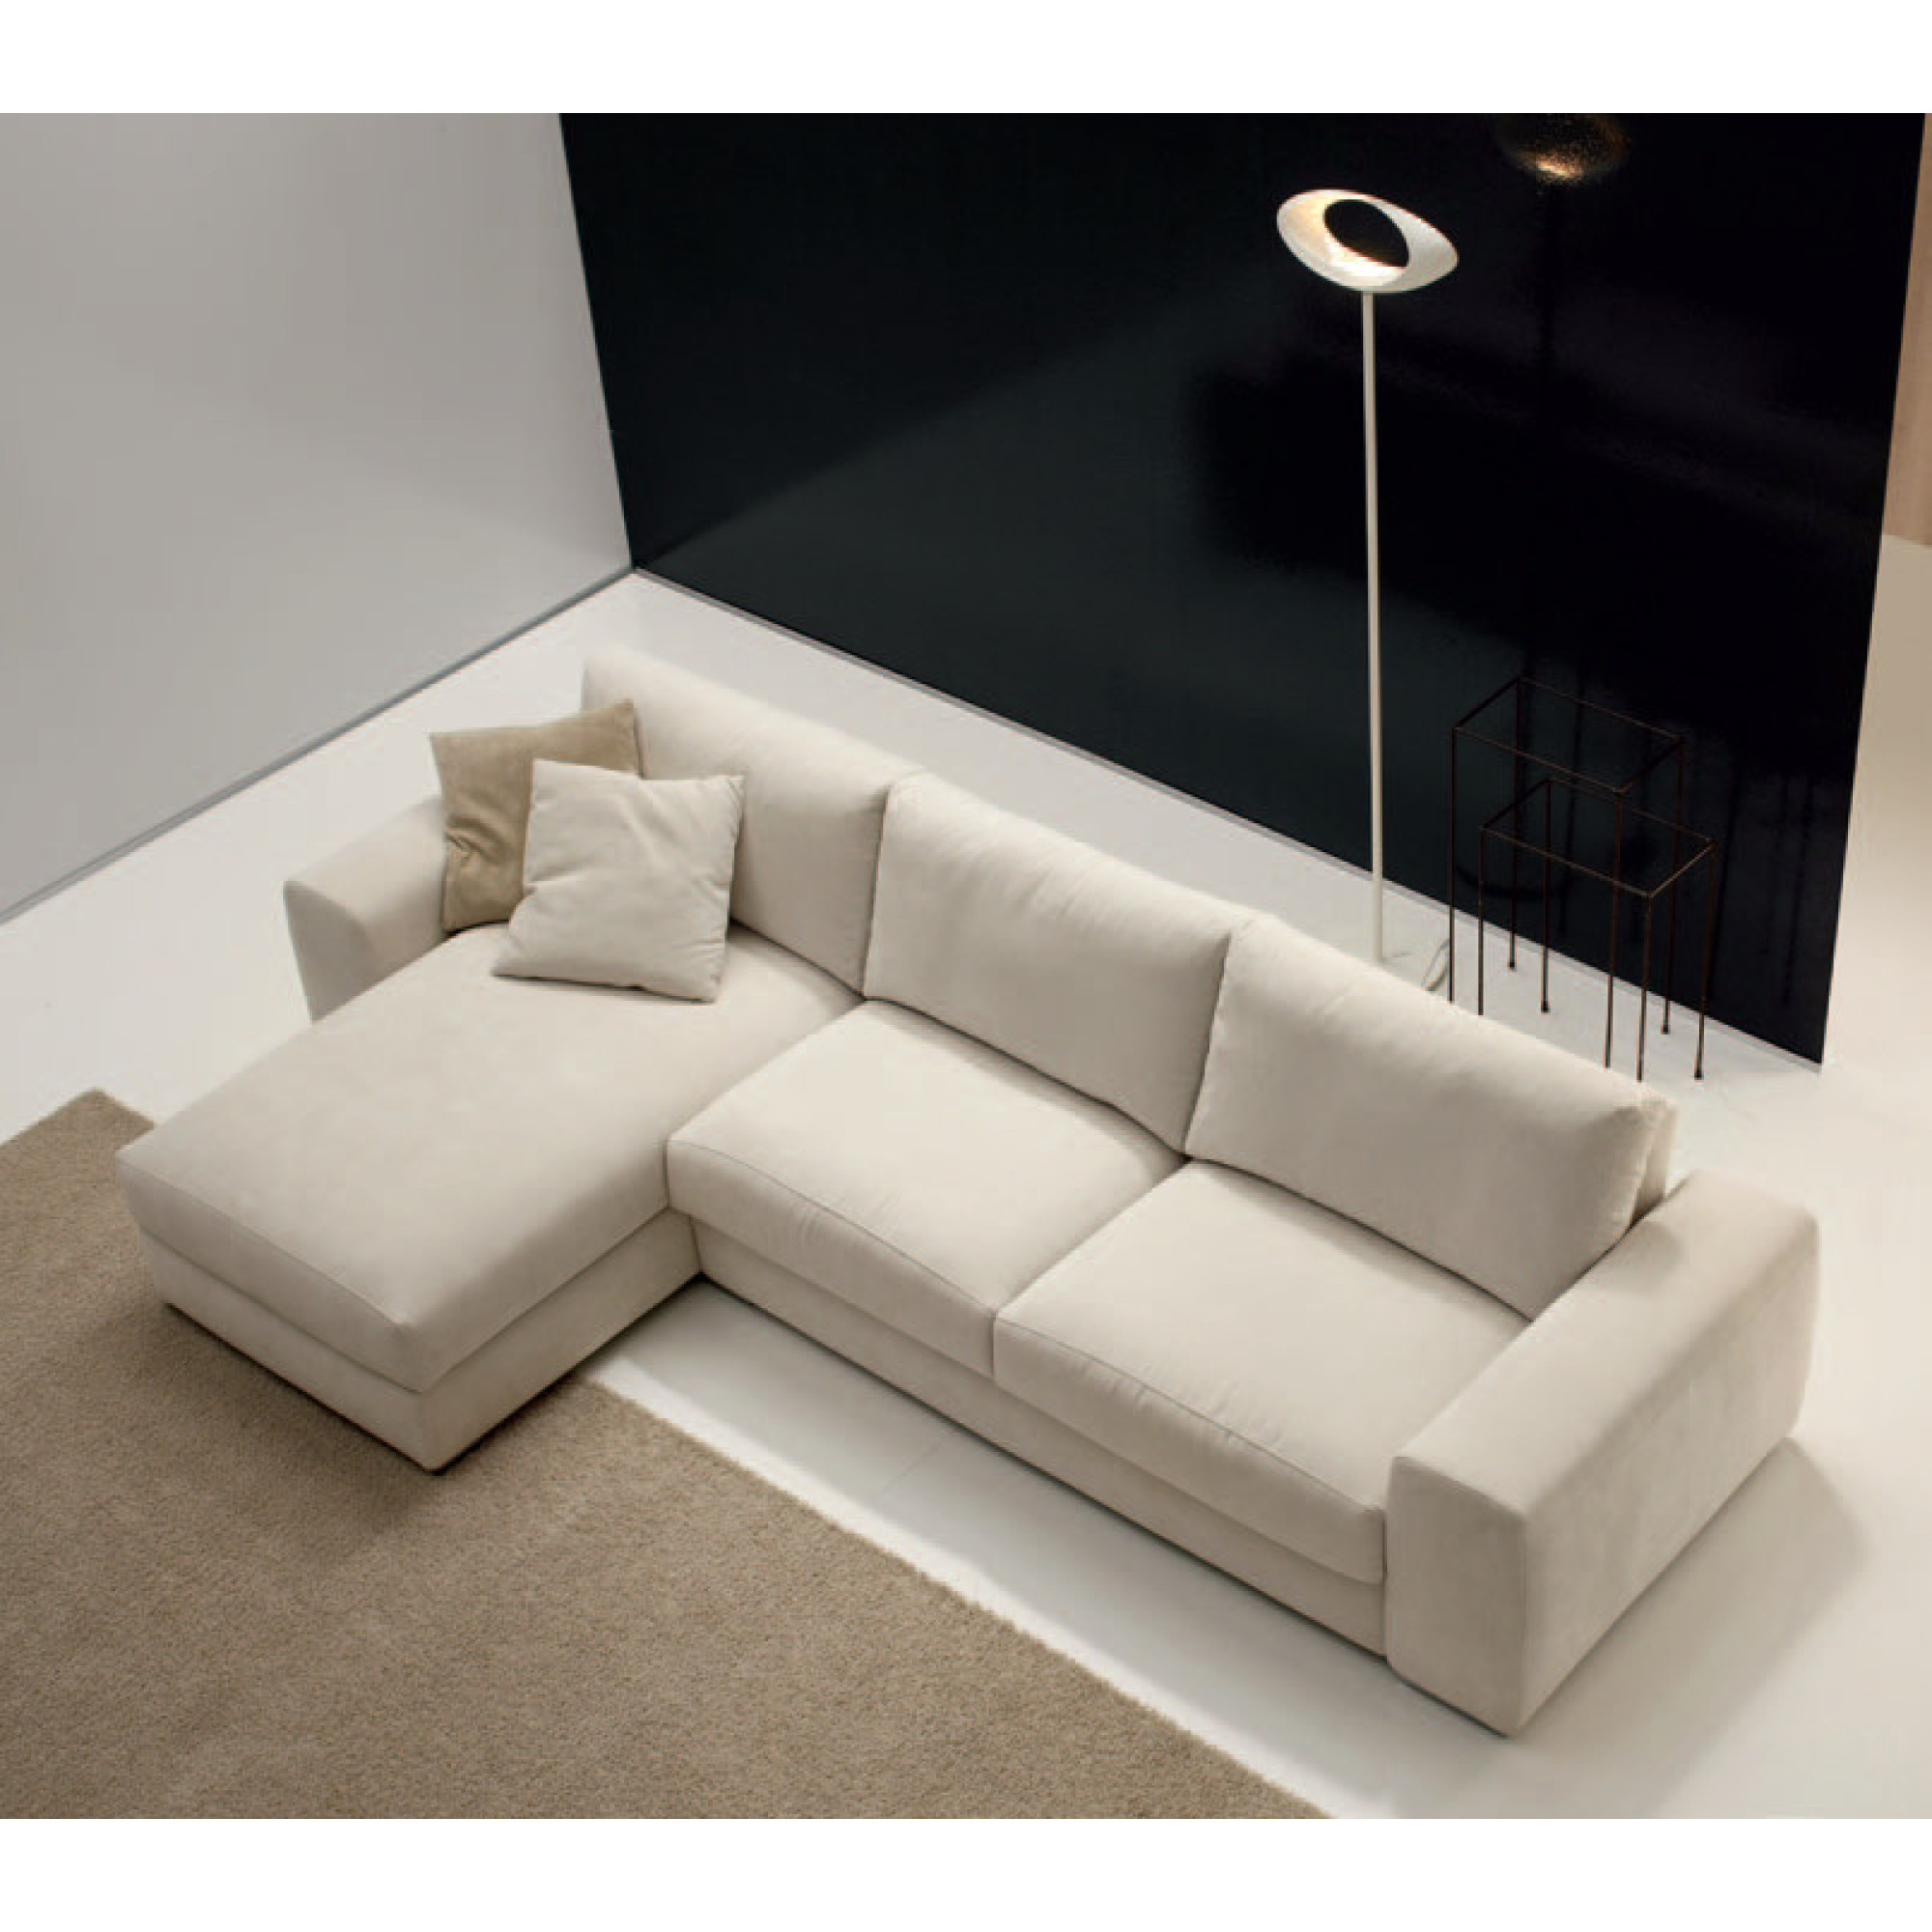 TIME SOFA WITH CHAISE LONGUE, by SPAGNOL